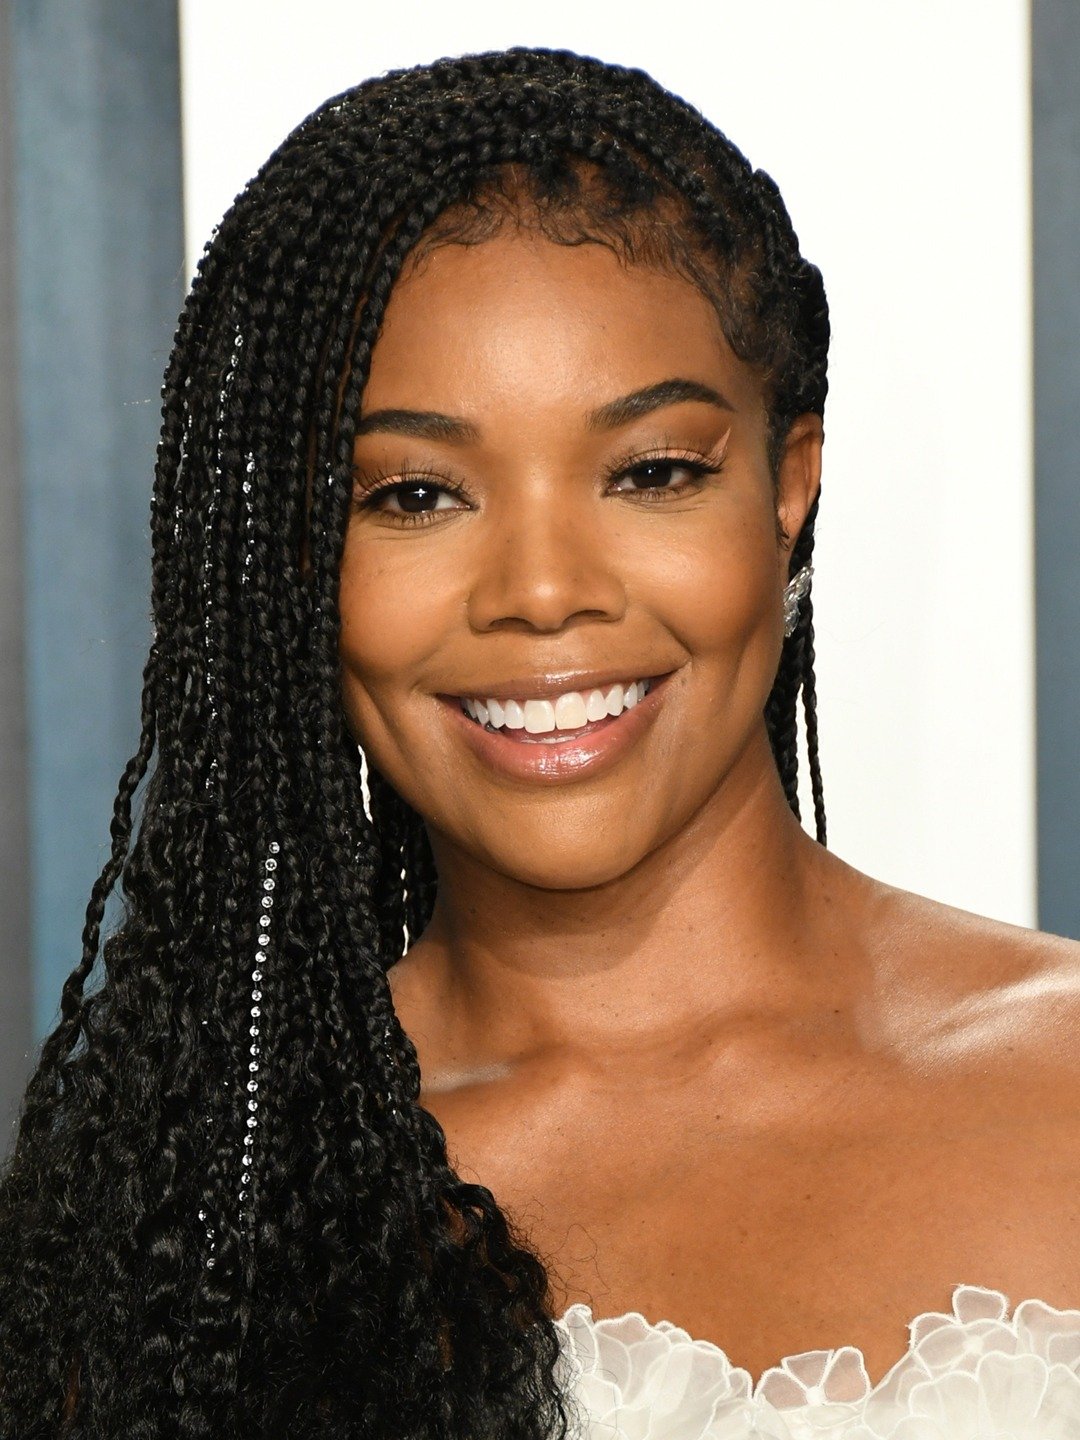 Gabrielle Union eventually unearthed some of her own insights into her assault during the season 3 filming of 'Truth Be Told'